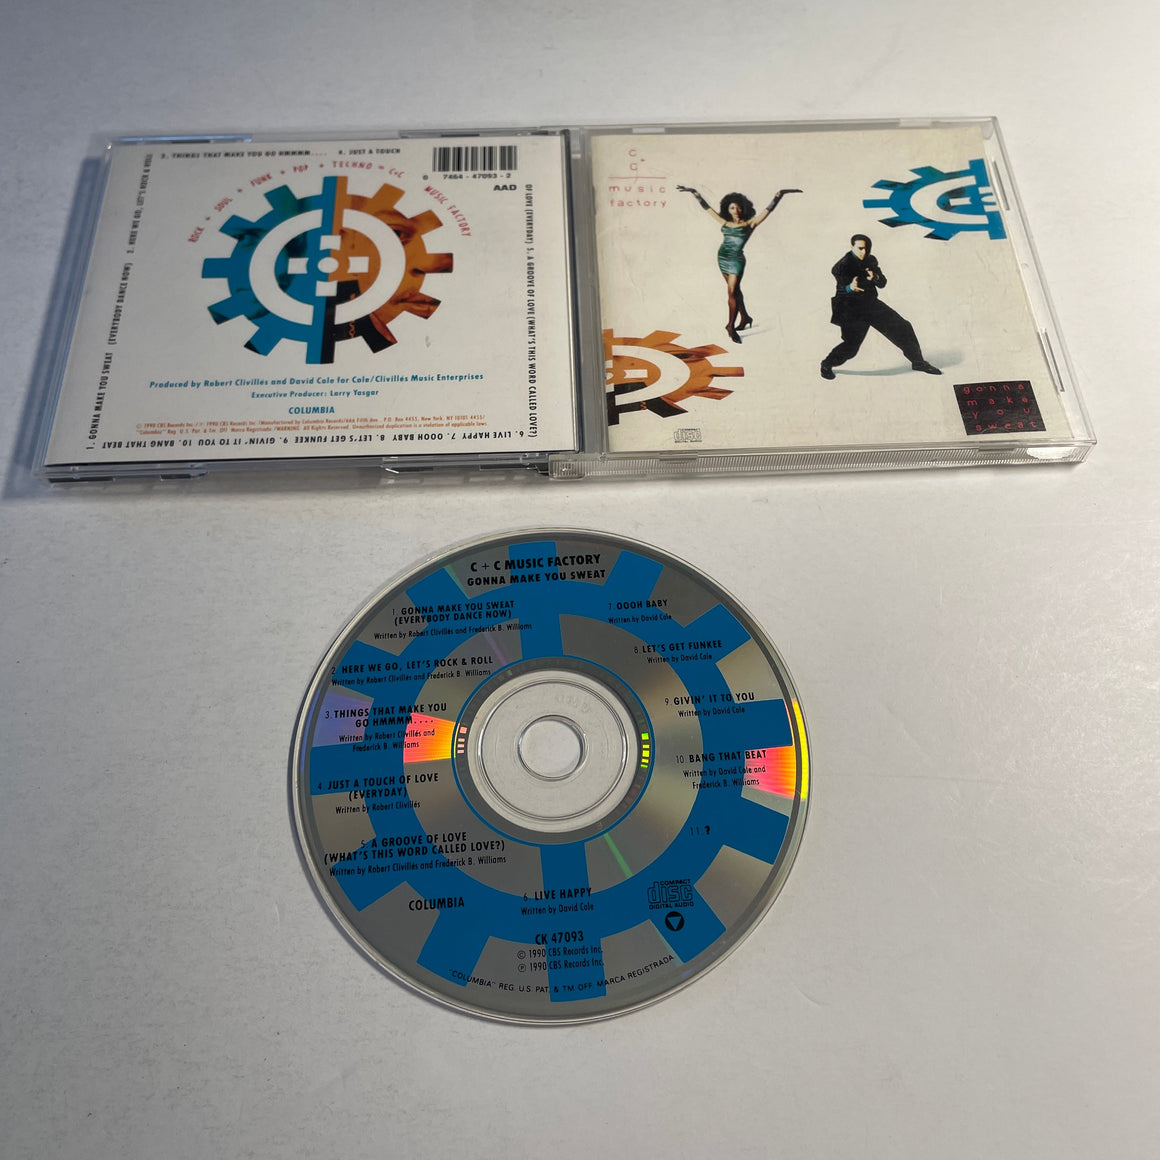 C + C Music Factory C + C Music Factory – Gonna Make You Sweat Used CD VG+\VG+